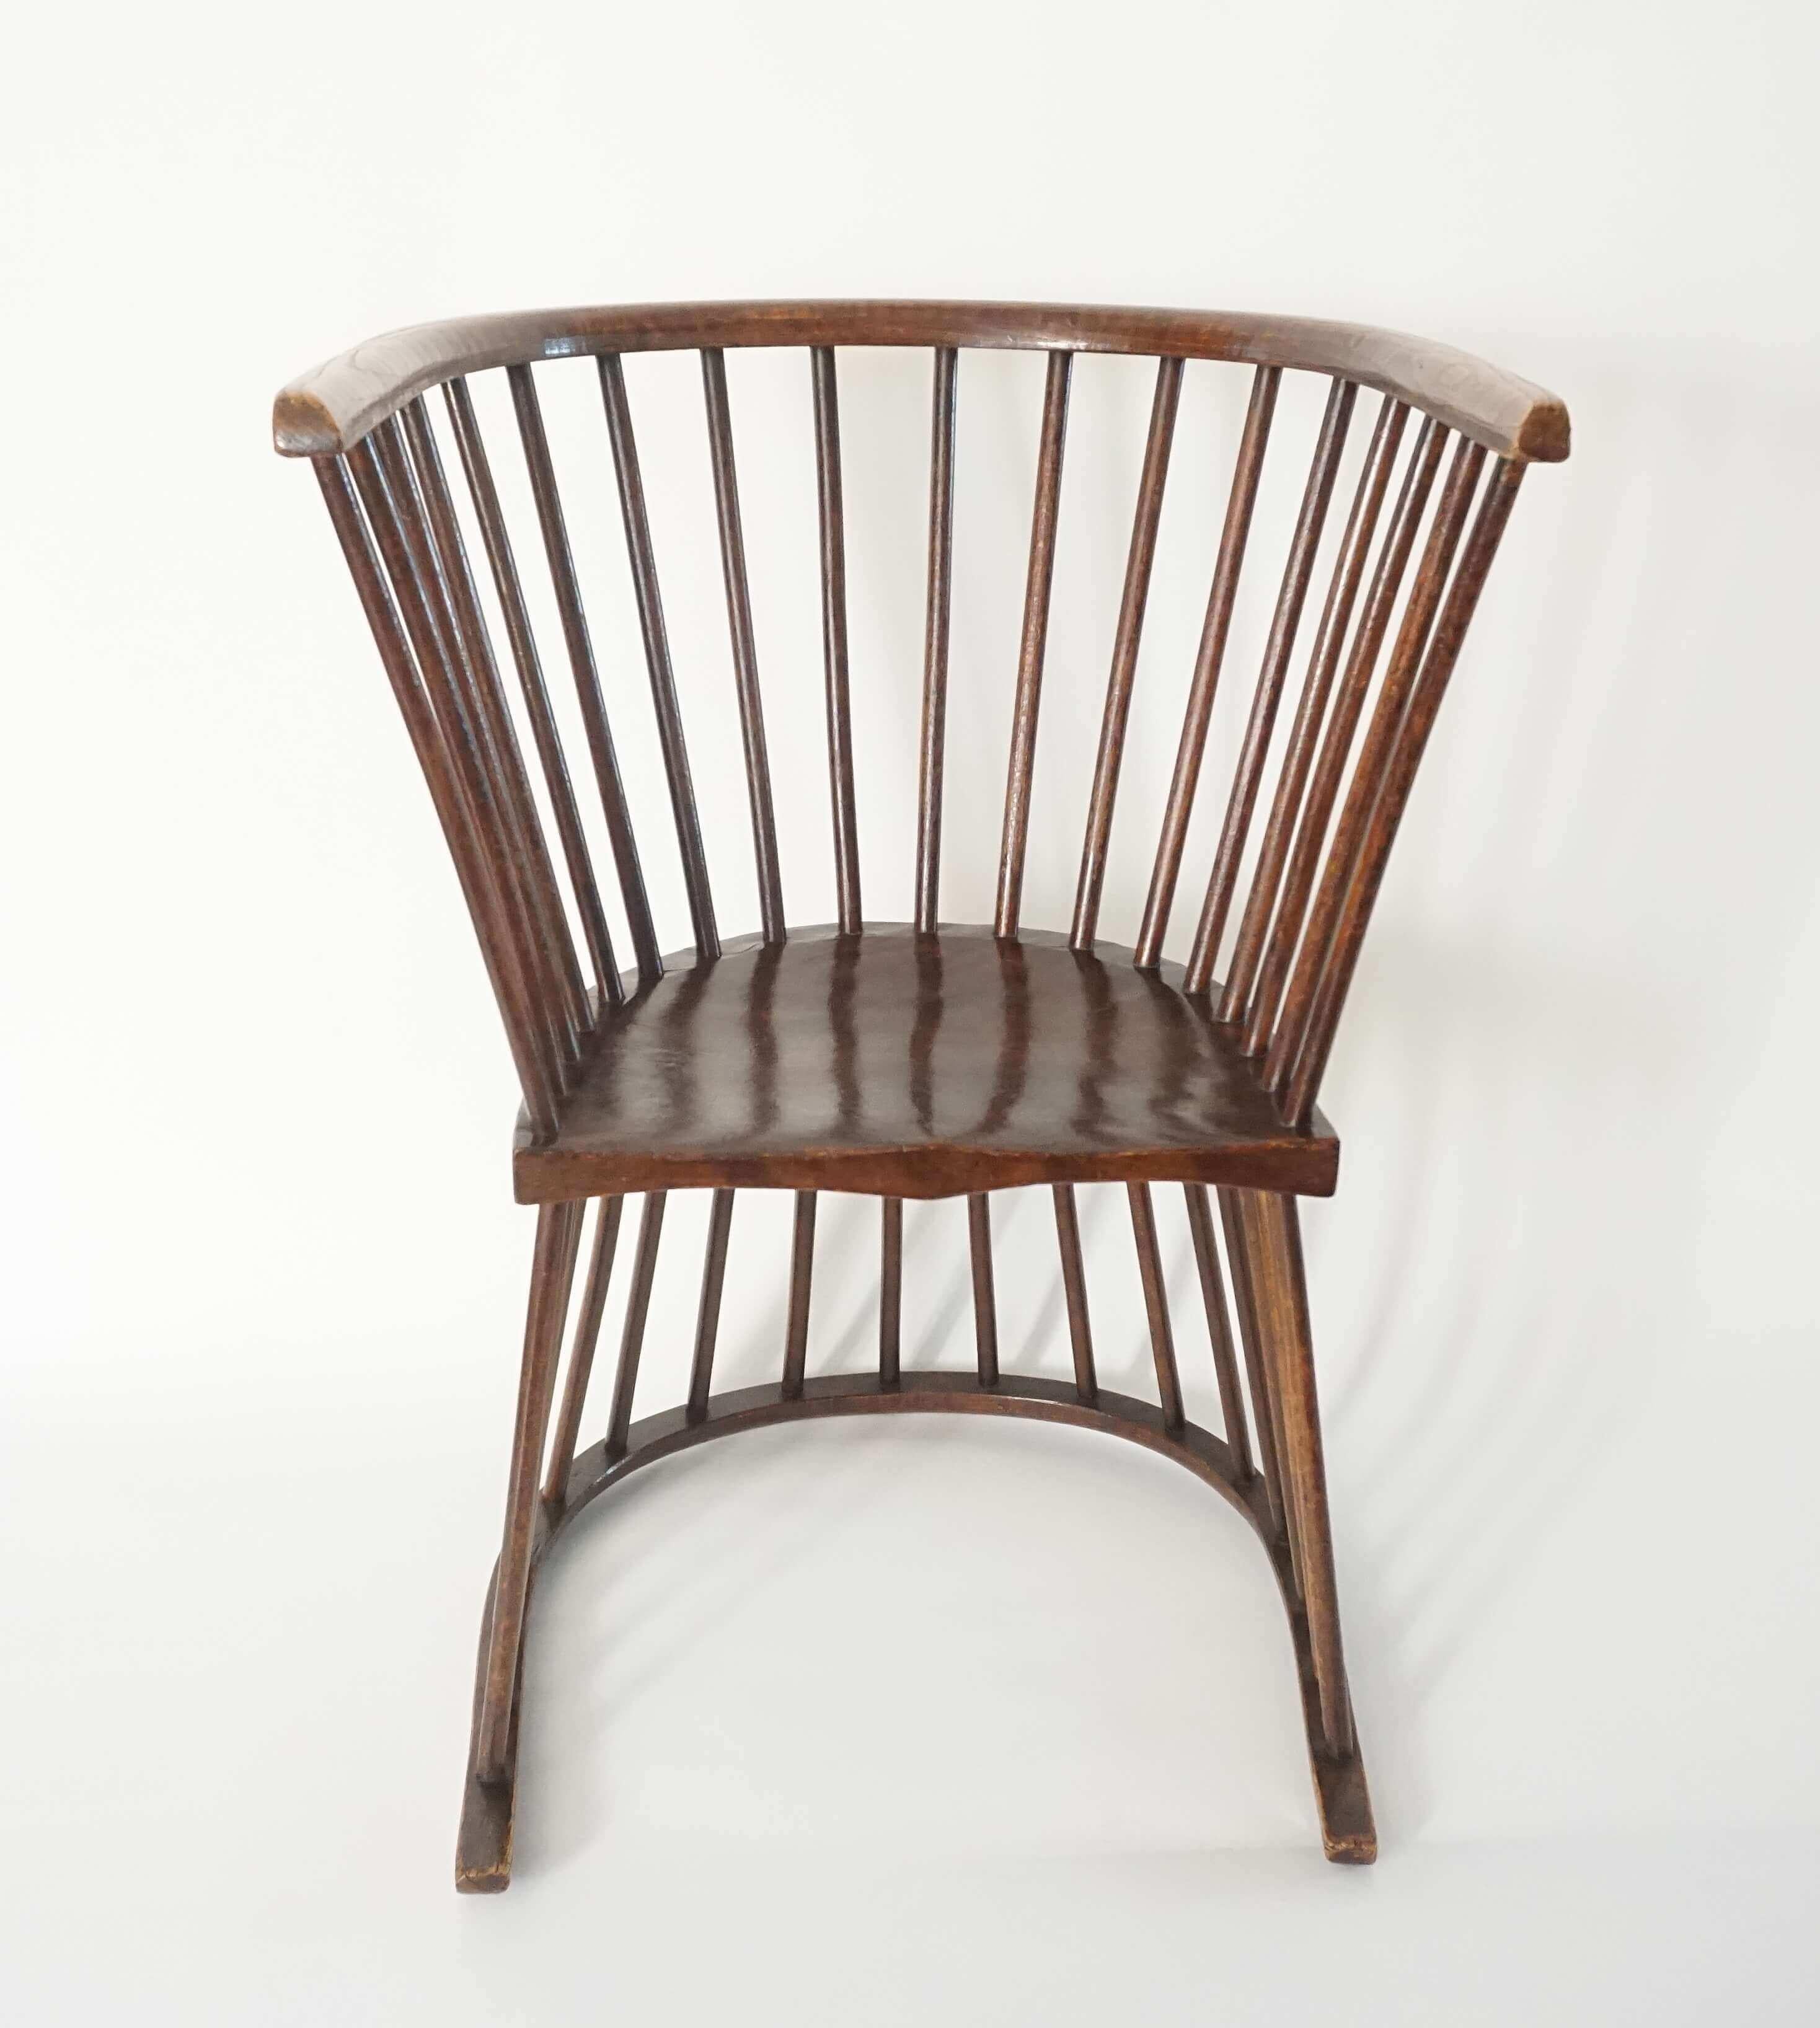 English Arts & Crafts modified Windsor style chair of modernist or contemporary percept having double reversible (either 'sides' functional) 'horse-shoe' form and Circassian Walnut frame; the bent U-shape crest rails spindle joined to carve-shaped